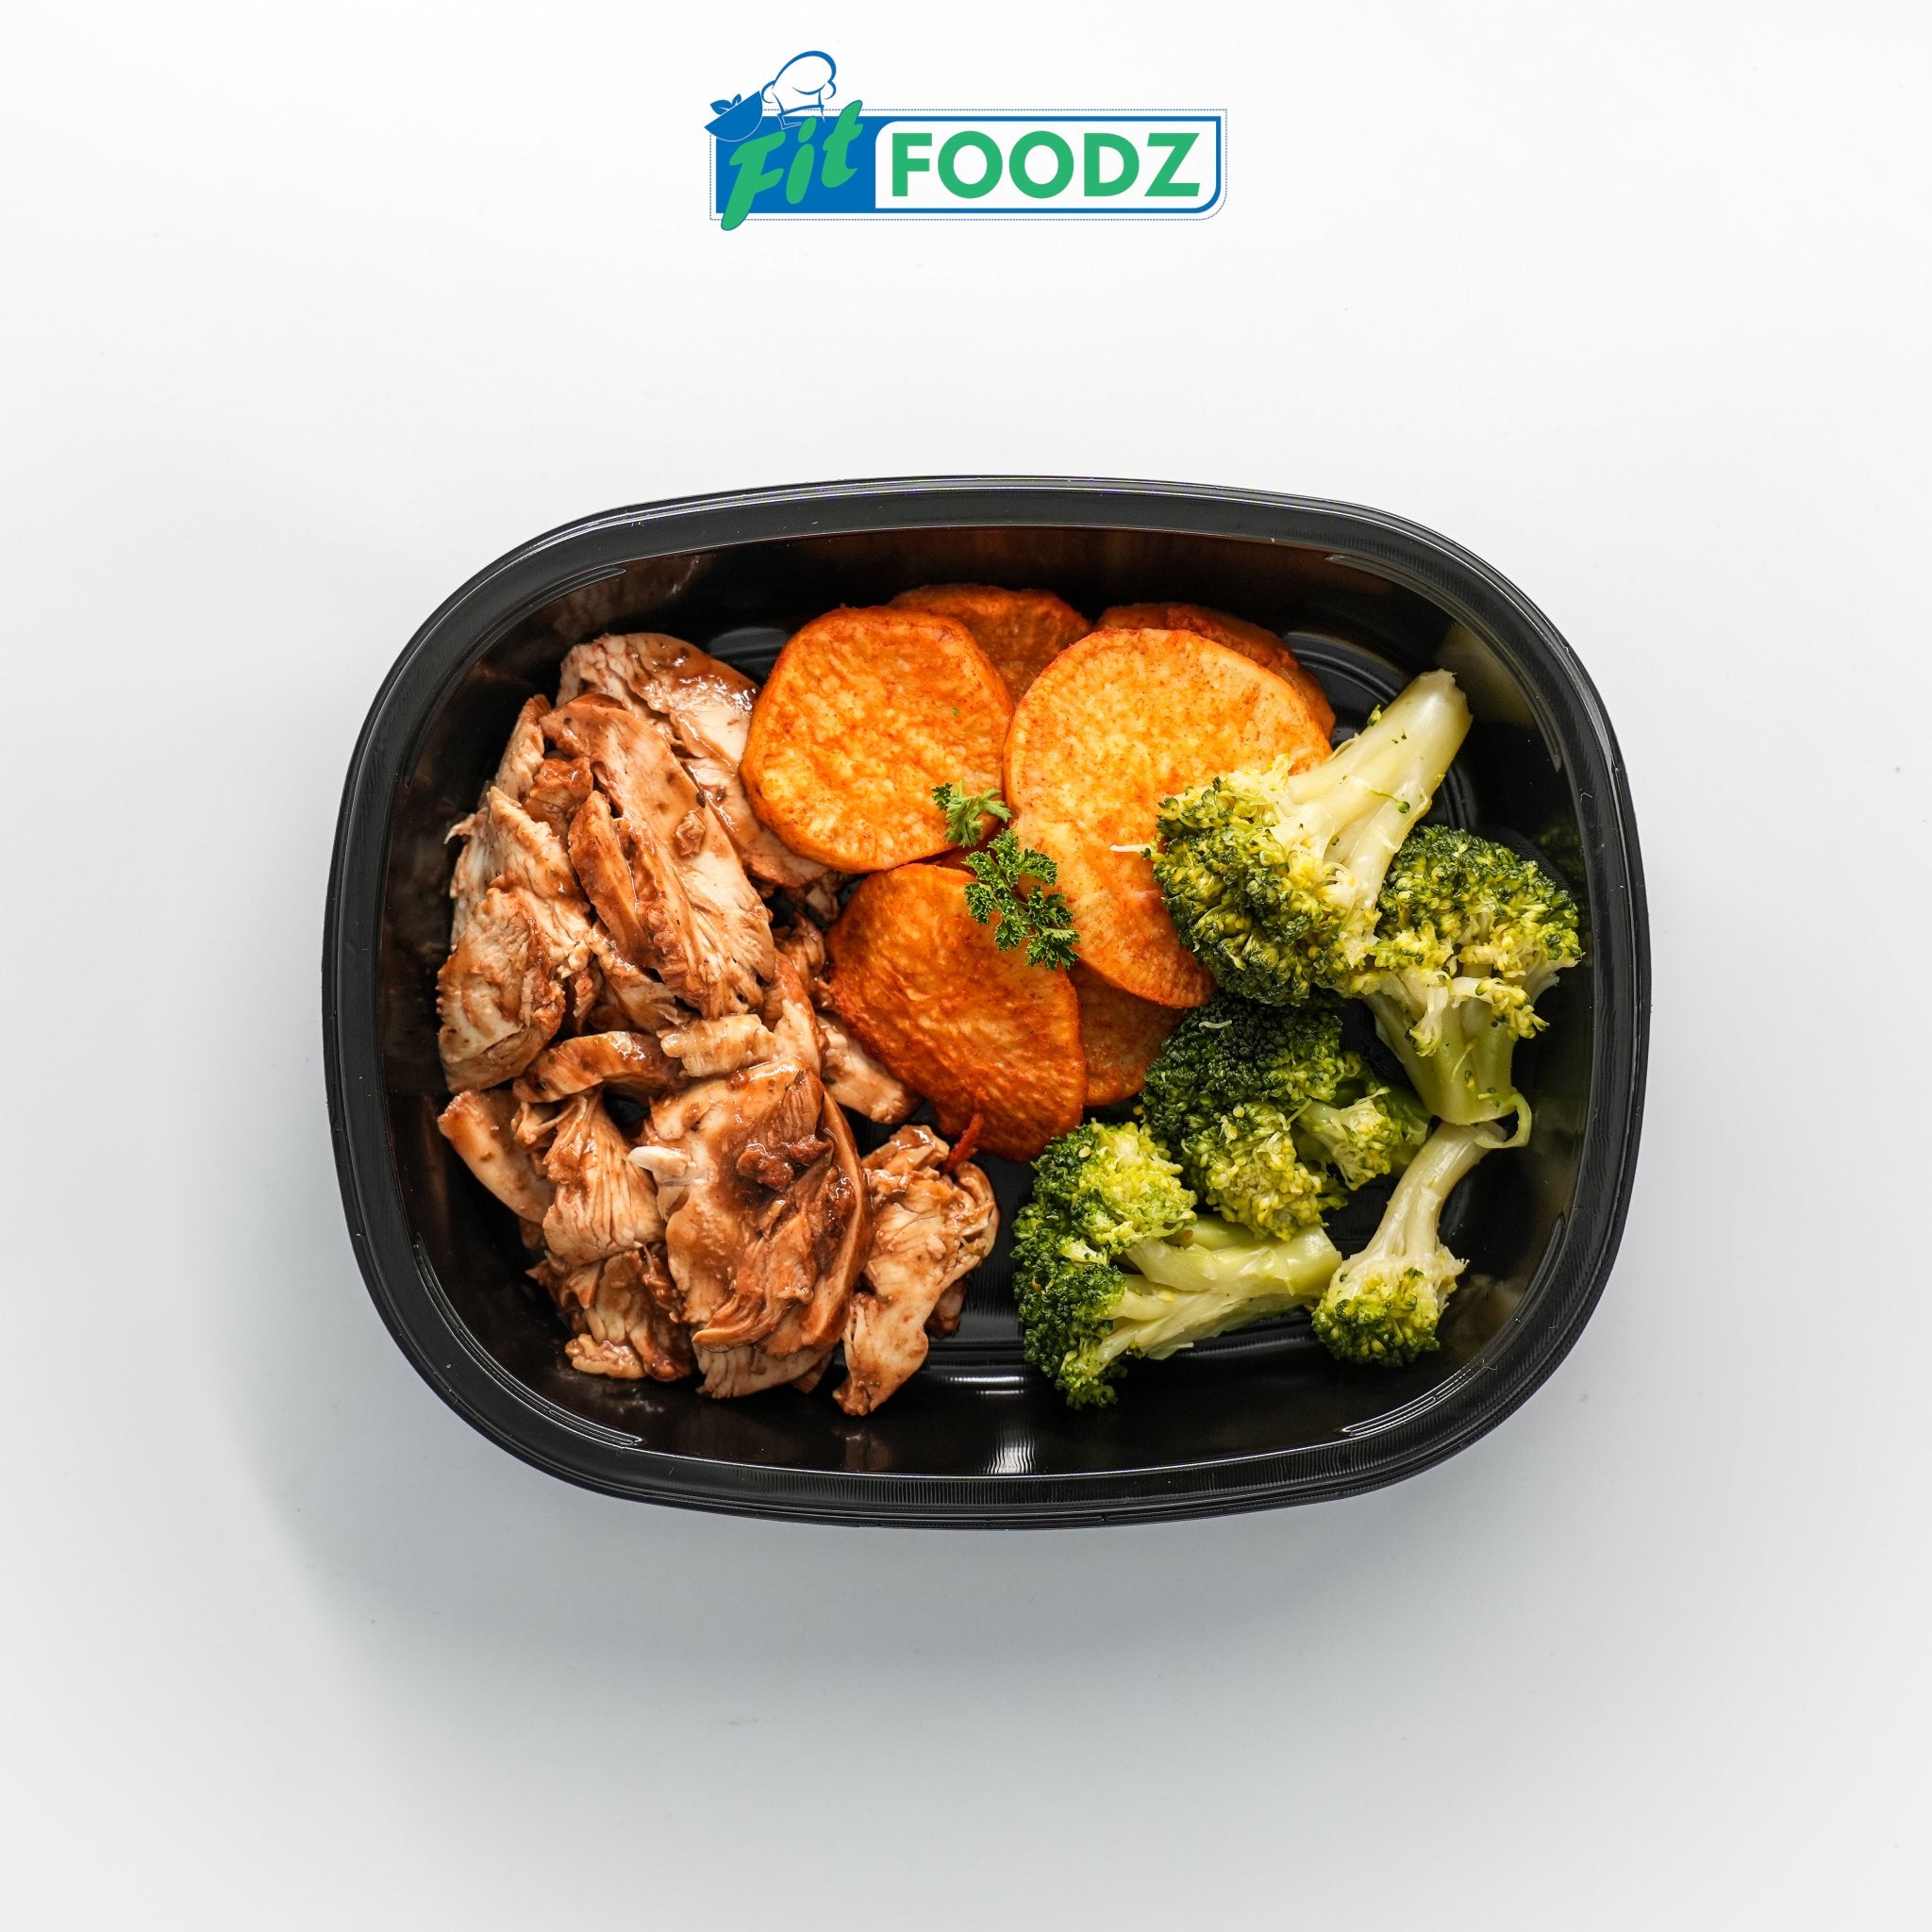 BBQ Shredded Chicken Fillet, Roasted Paprika Sweet Potato and Broccoli